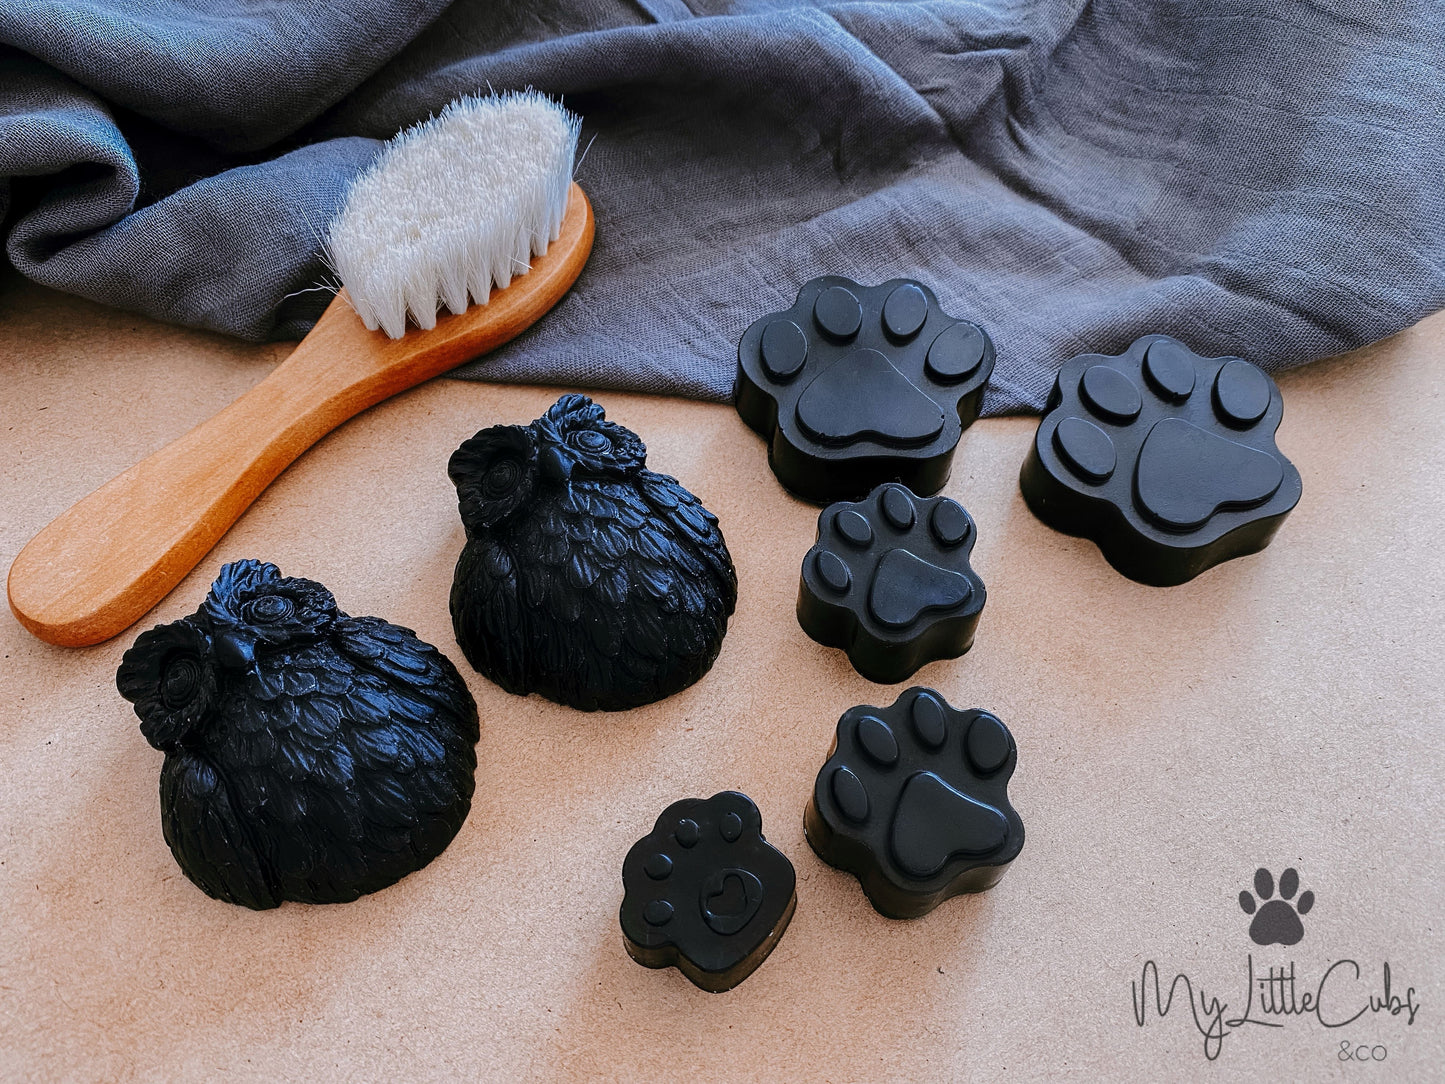 Handcrafted Vegan Activated Charcoal Soap